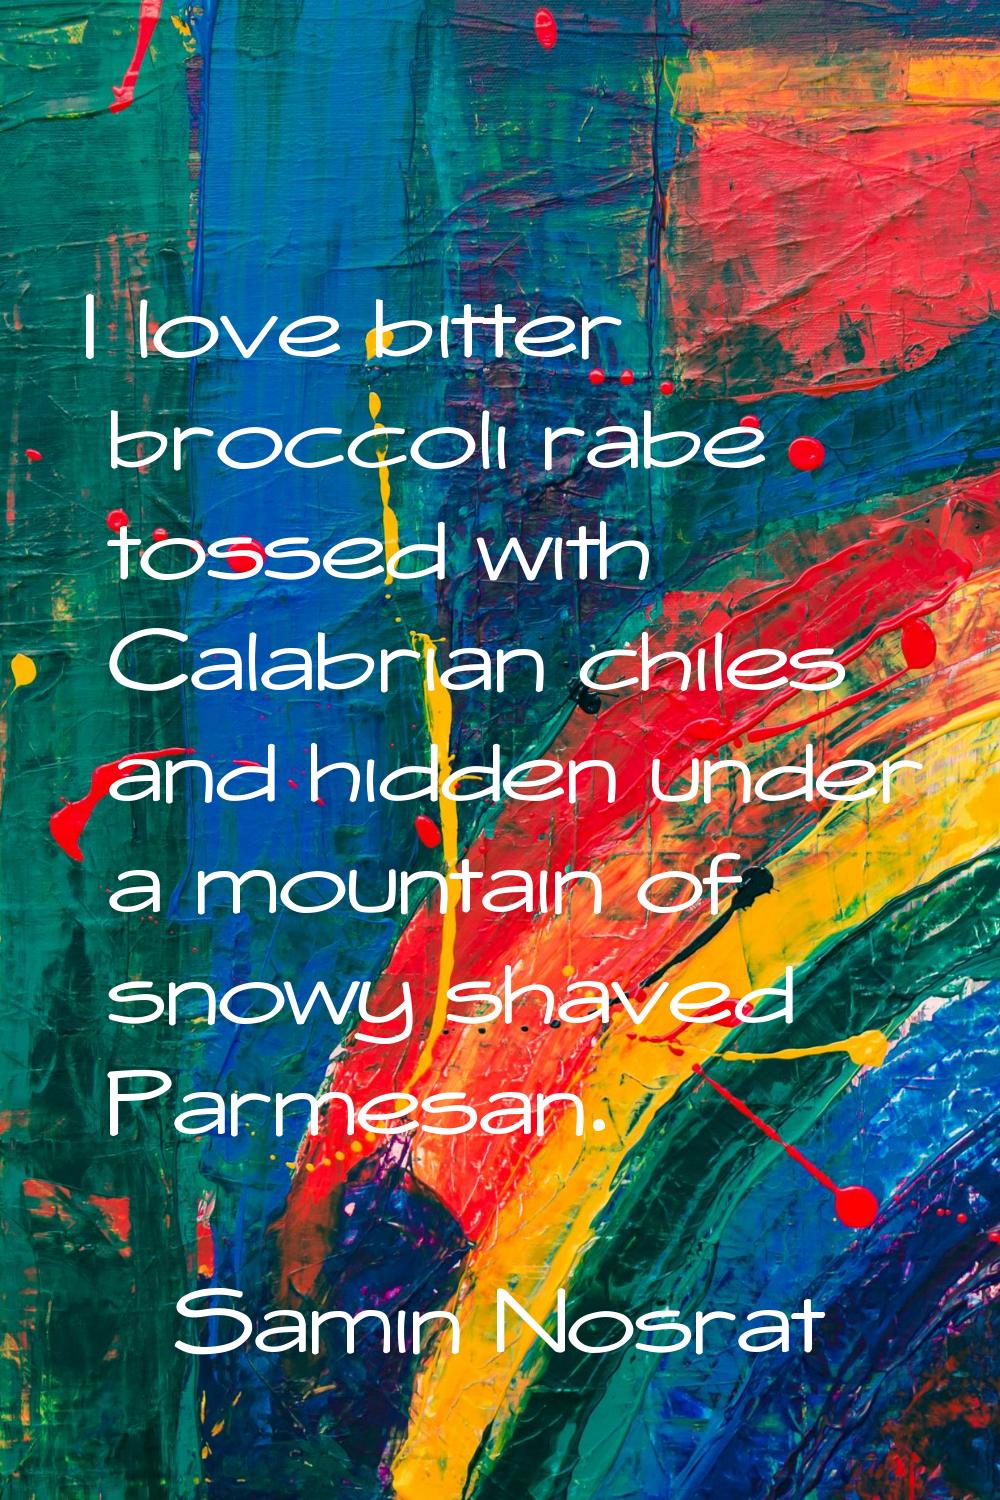 I love bitter broccoli rabe tossed with Calabrian chiles and hidden under a mountain of snowy shave